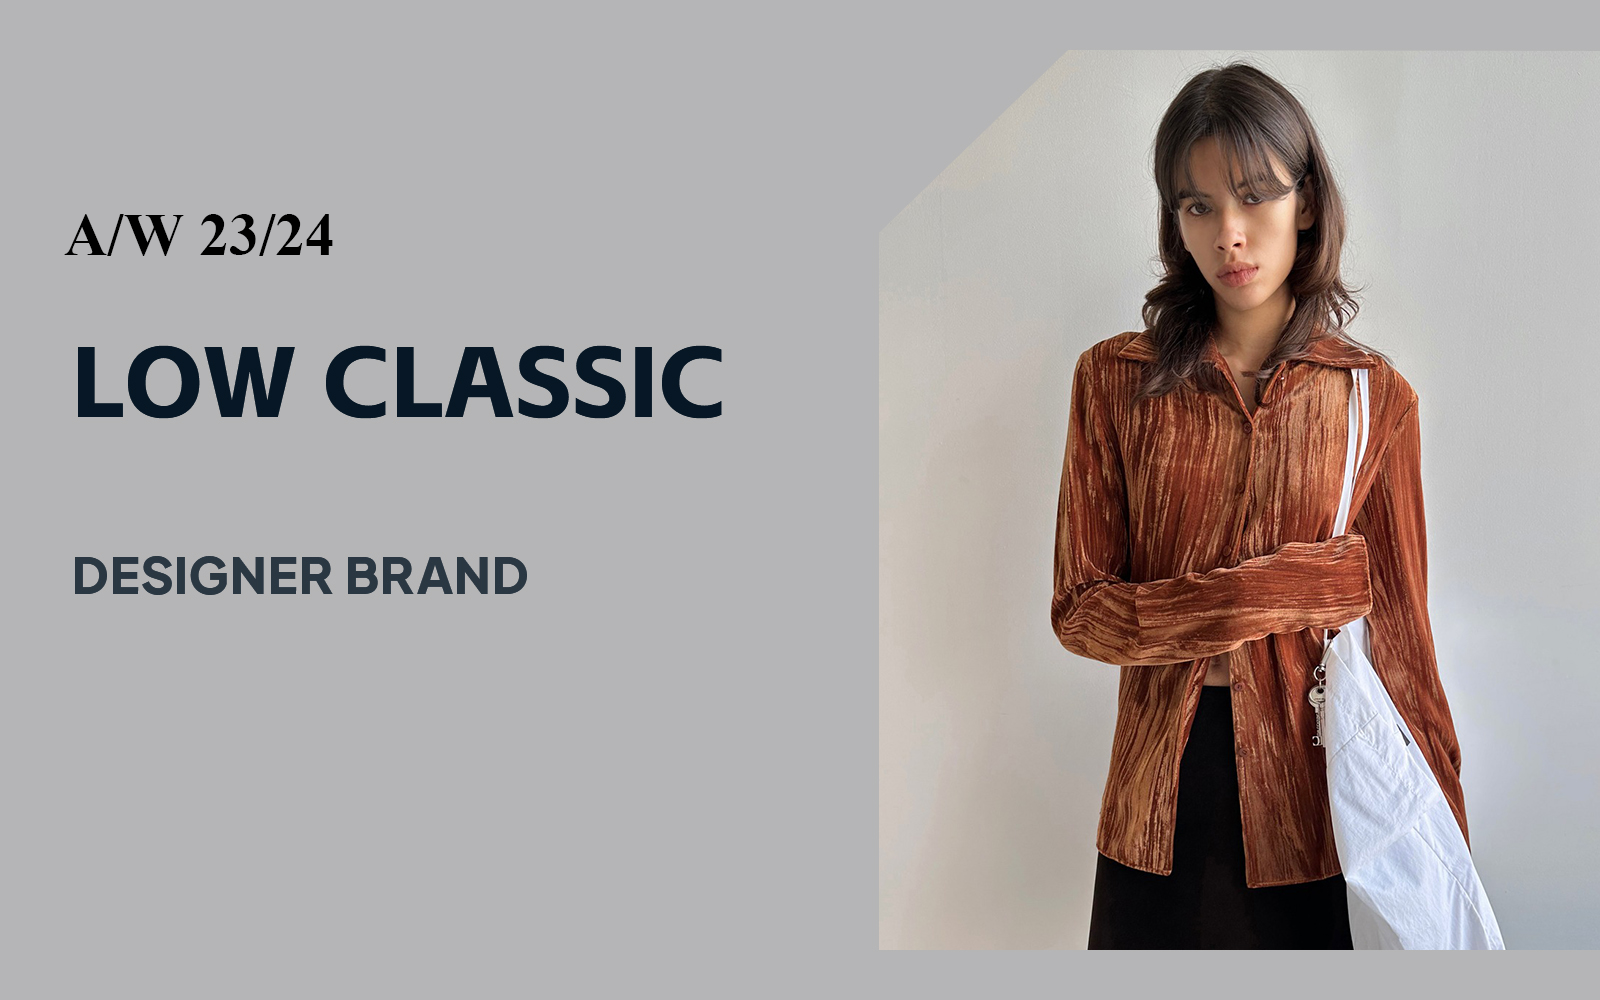 Cutting-edge Classic -- The Analysis of LOW CLASSIC The Womenswear Designer Brand